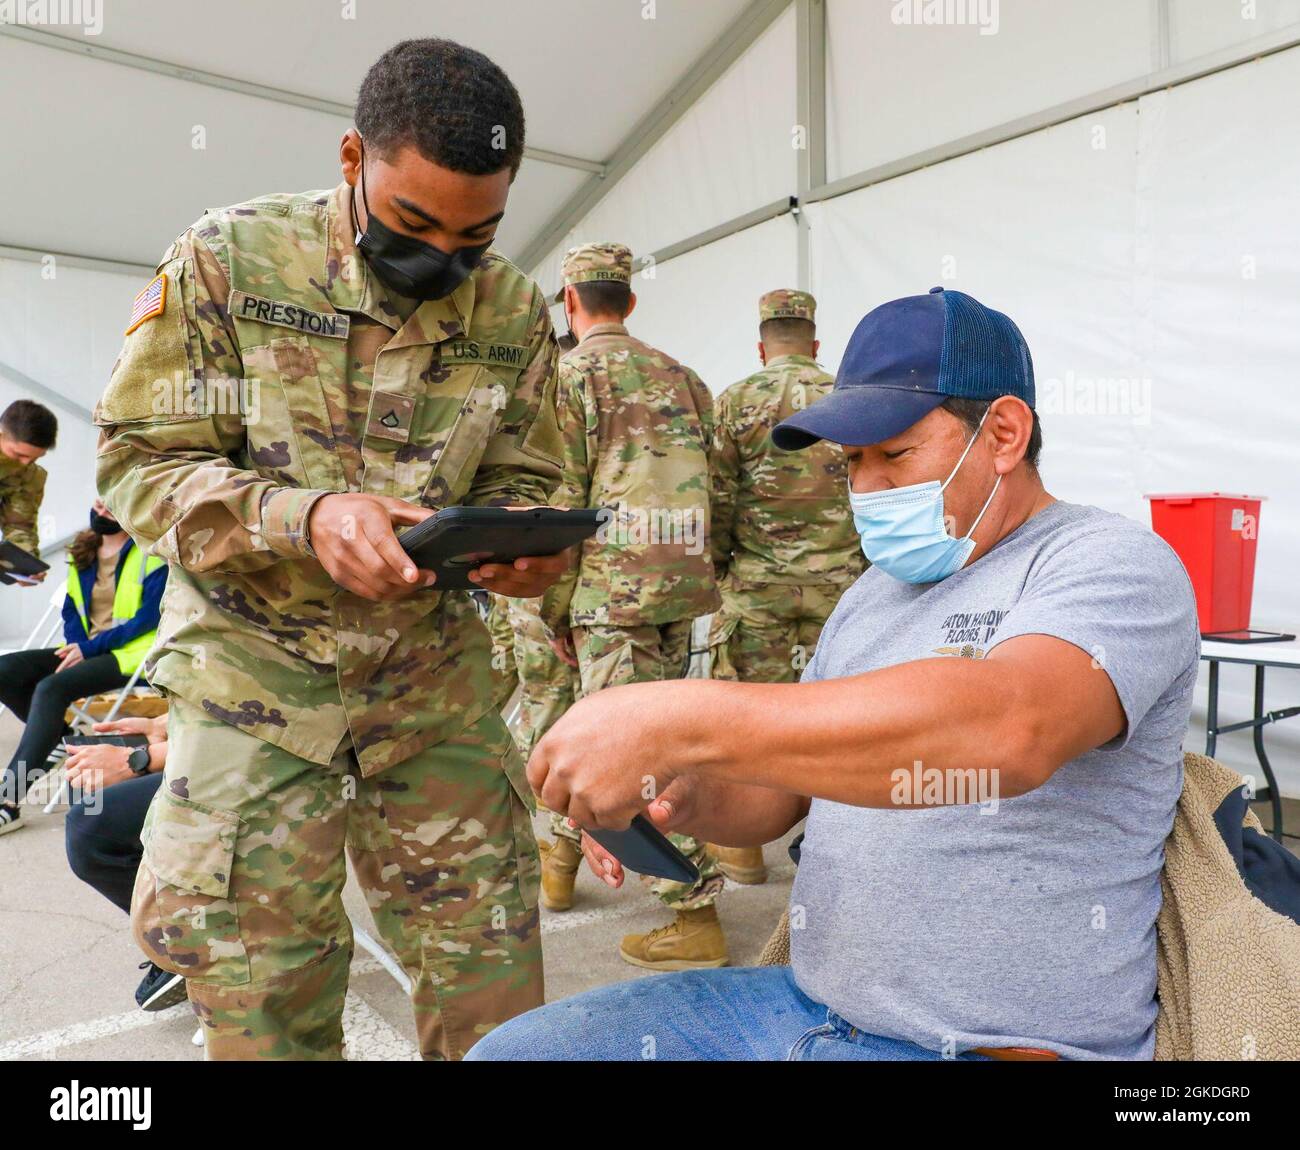 U.S. Army Pfc. Kyle Preston, a M1 armor vehicle crew member with 1st Combined Arms Battalion 63rd Armor Regiment, 2nd Armored Brigade Combat Team, 1st Infantry Division, speaks with Juan Castillo, a Dallas County community member, at the Fair Park Community Vaccination Center (CVC) in Dallas, March 22, 2021, about Castillo receiving a COVID-19 vaccination shot. On this day, the Dallas CVC reached a total of over 200,000 COVID-19 vaccinations administered to local Dallas community members since its opening in January 2021. U.S. Northern Command, through U.S. Army North, remains committed to pro Stock Photo